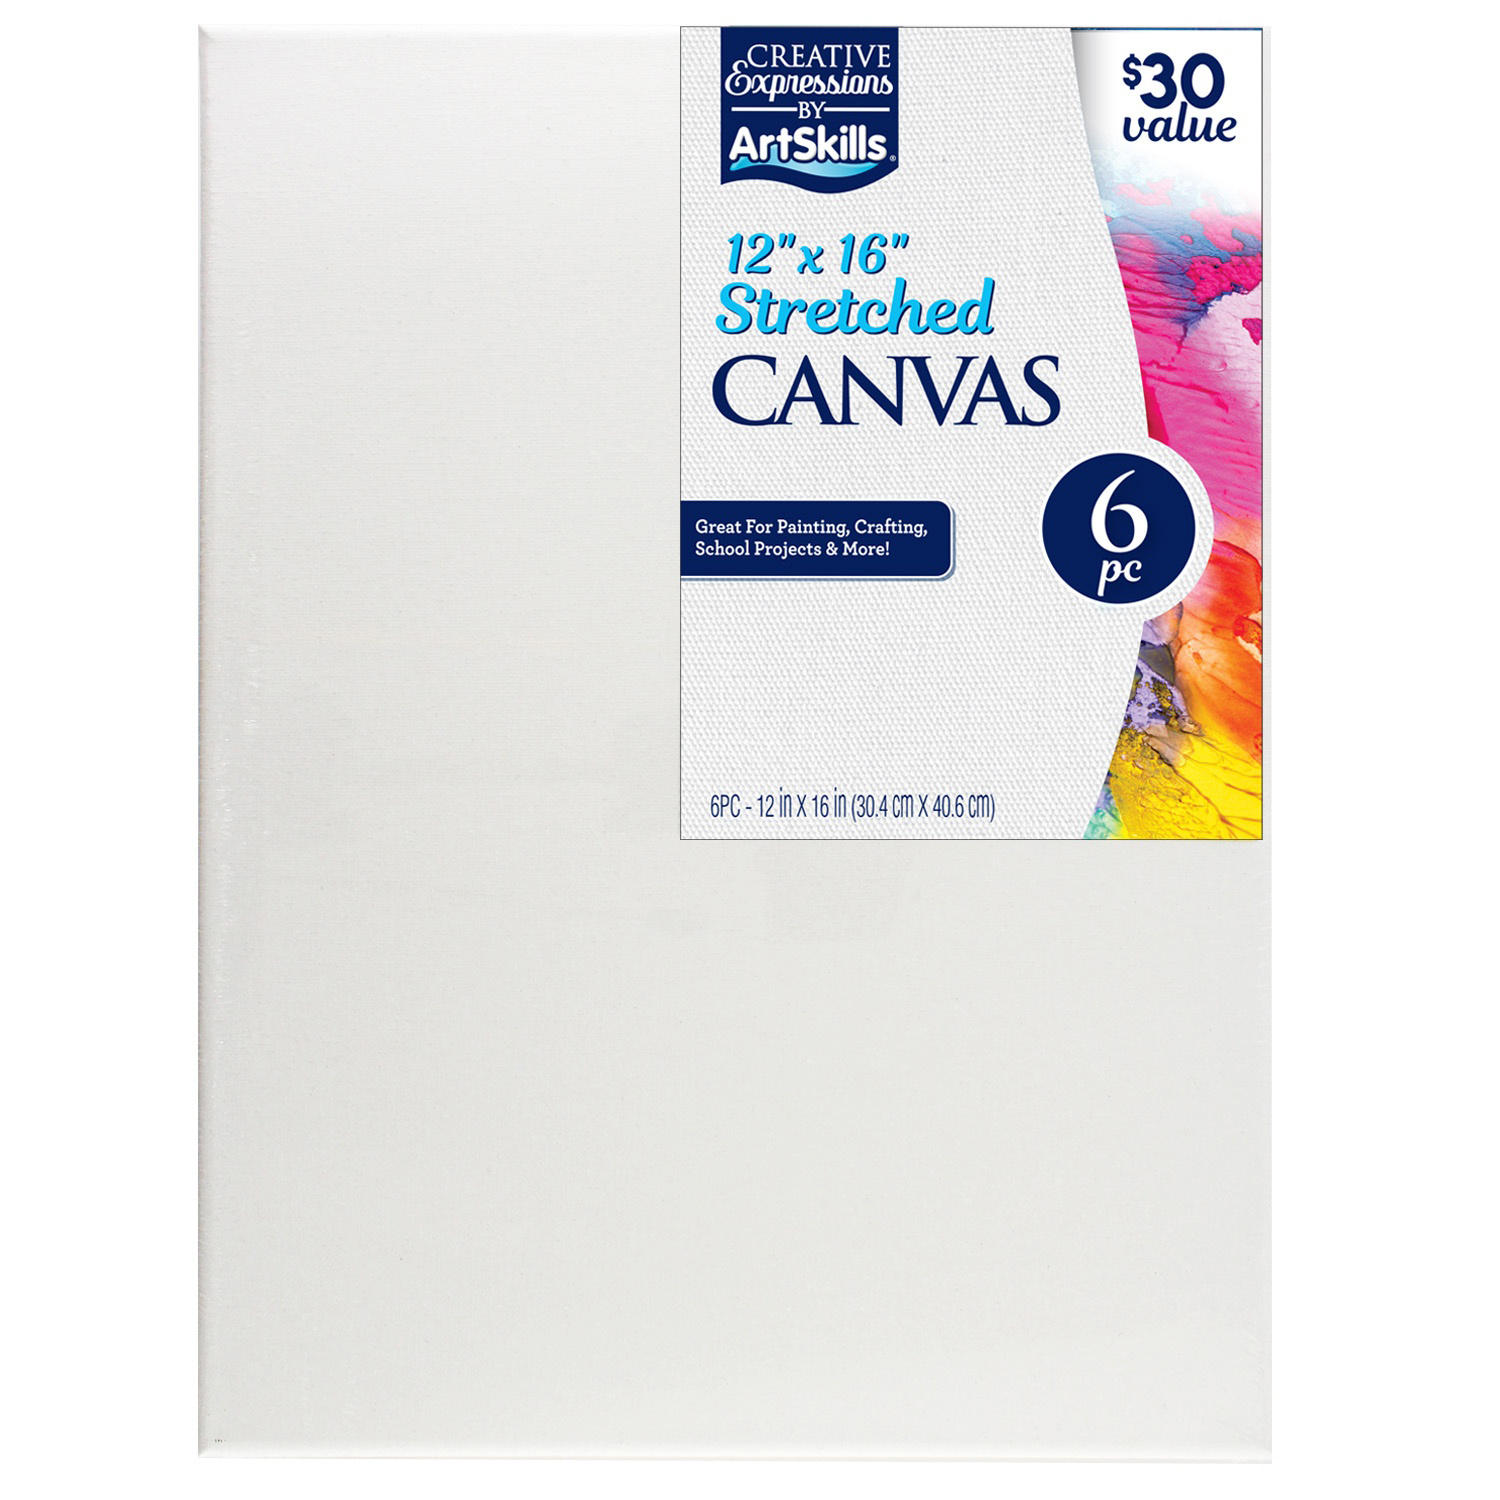 ArtSkills 12' x 16' Stretched Canvas for Arts and Crafts, 6 Pack